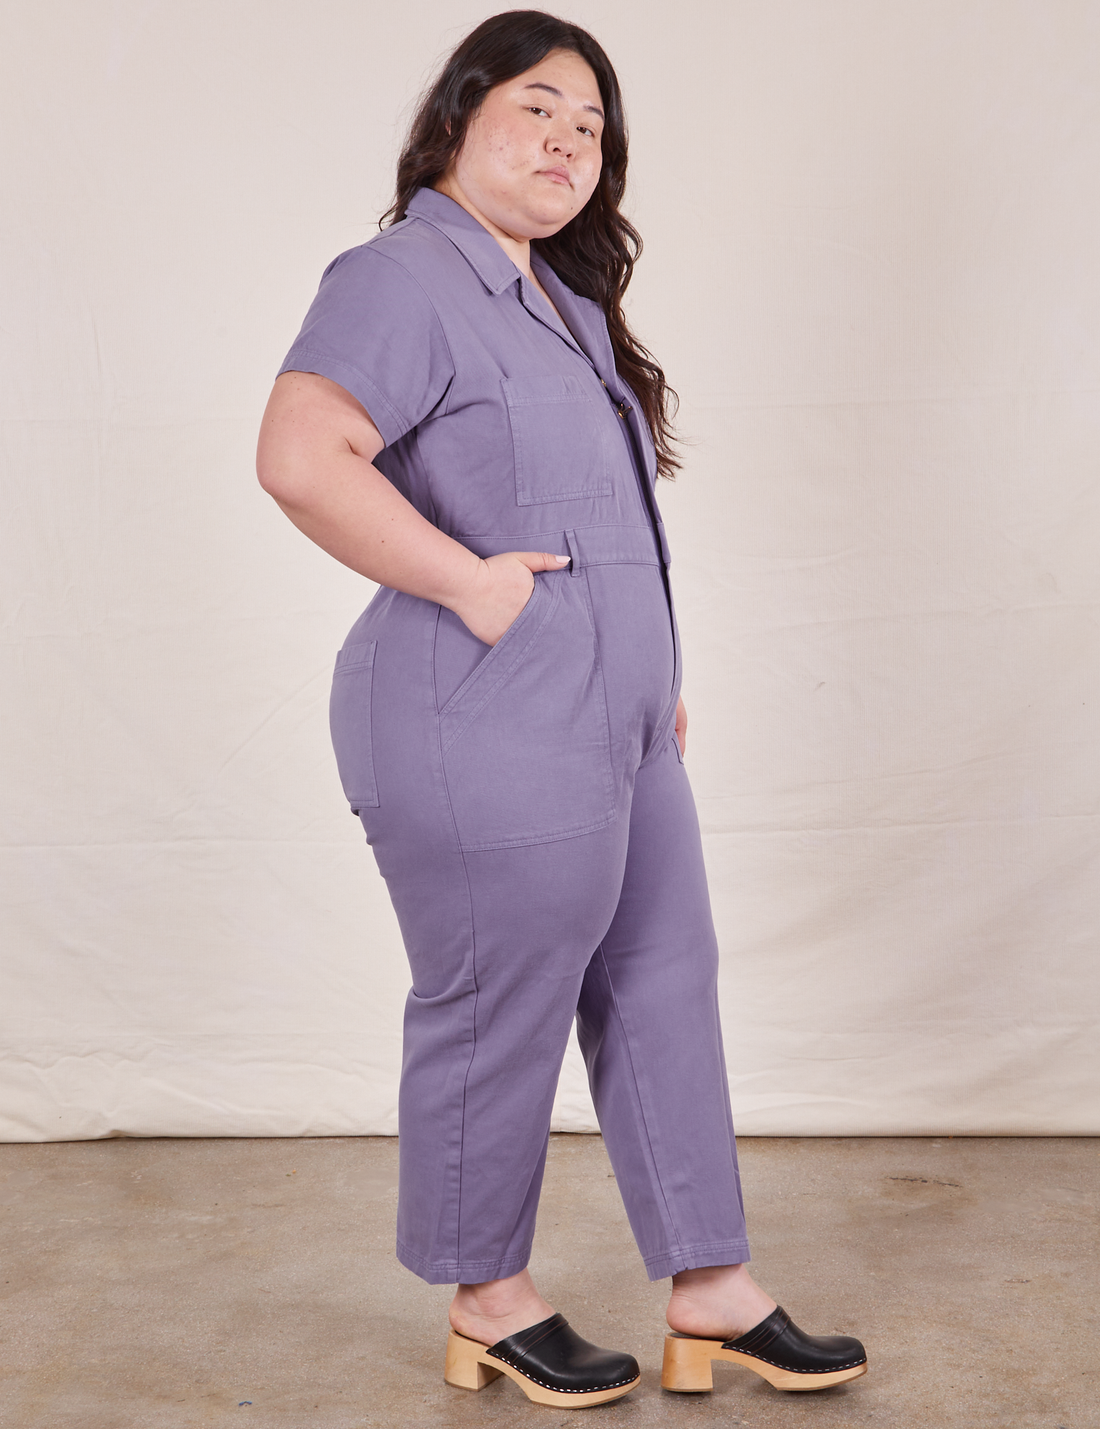 Petite Short Sleeve Jumpsuit in Faded Grape side view on Ashley